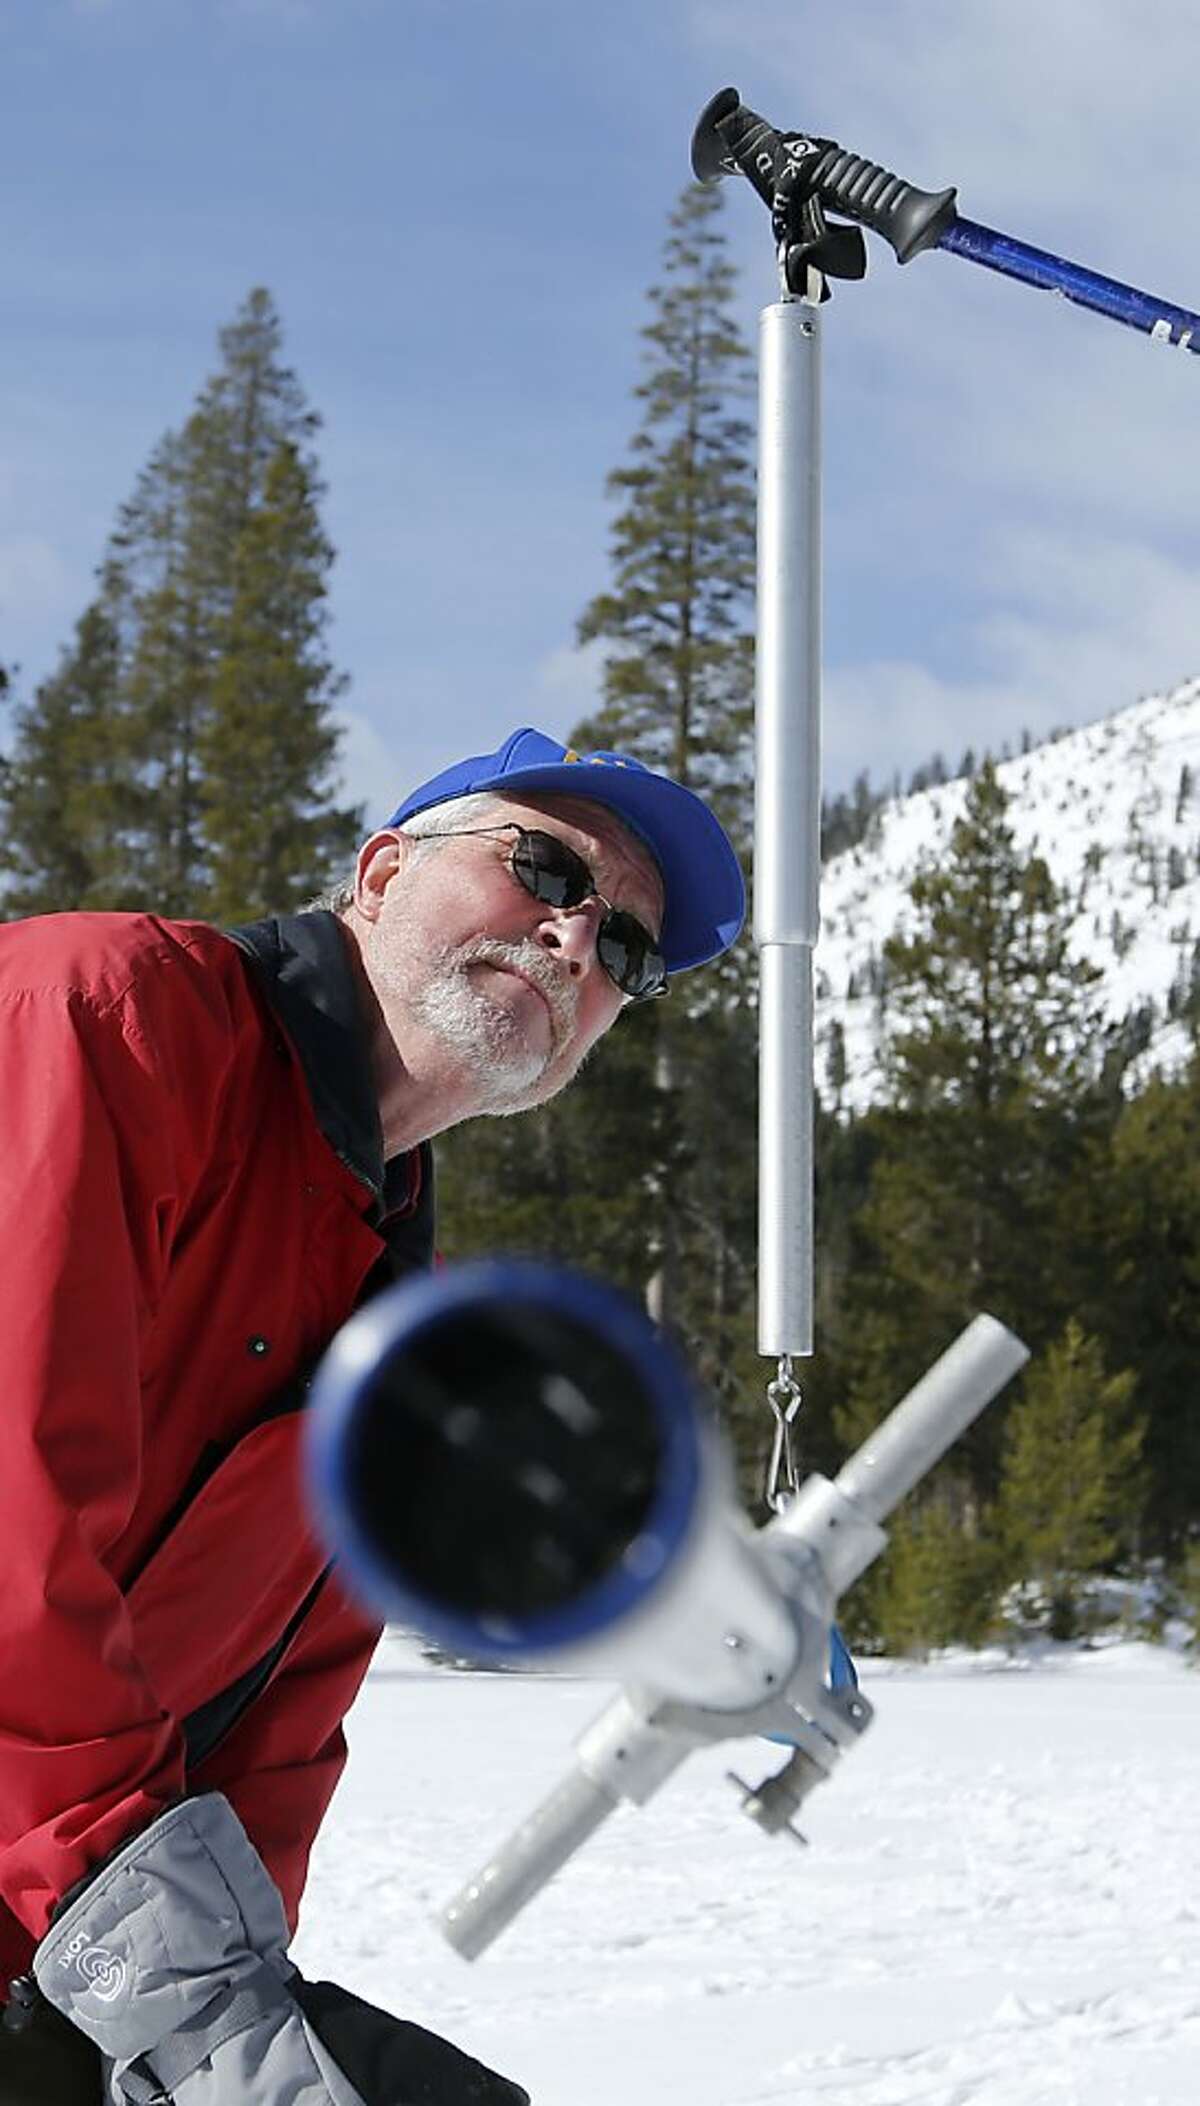 Frank Gehrke, chief of snow surveys for the Department of Water Resources, checks the weight of the snowpack survey tube as he conducts the second snow survey of the year at Echo Summit, Calif., Tuesday, Jan. 29, 2013. Surveyors have confirmed what many feared after a relatively dry January — the water content of snow that has accumulated in the Sierra is slightly below average for this time of year. (AP Photo/Rich Pedroncelli)